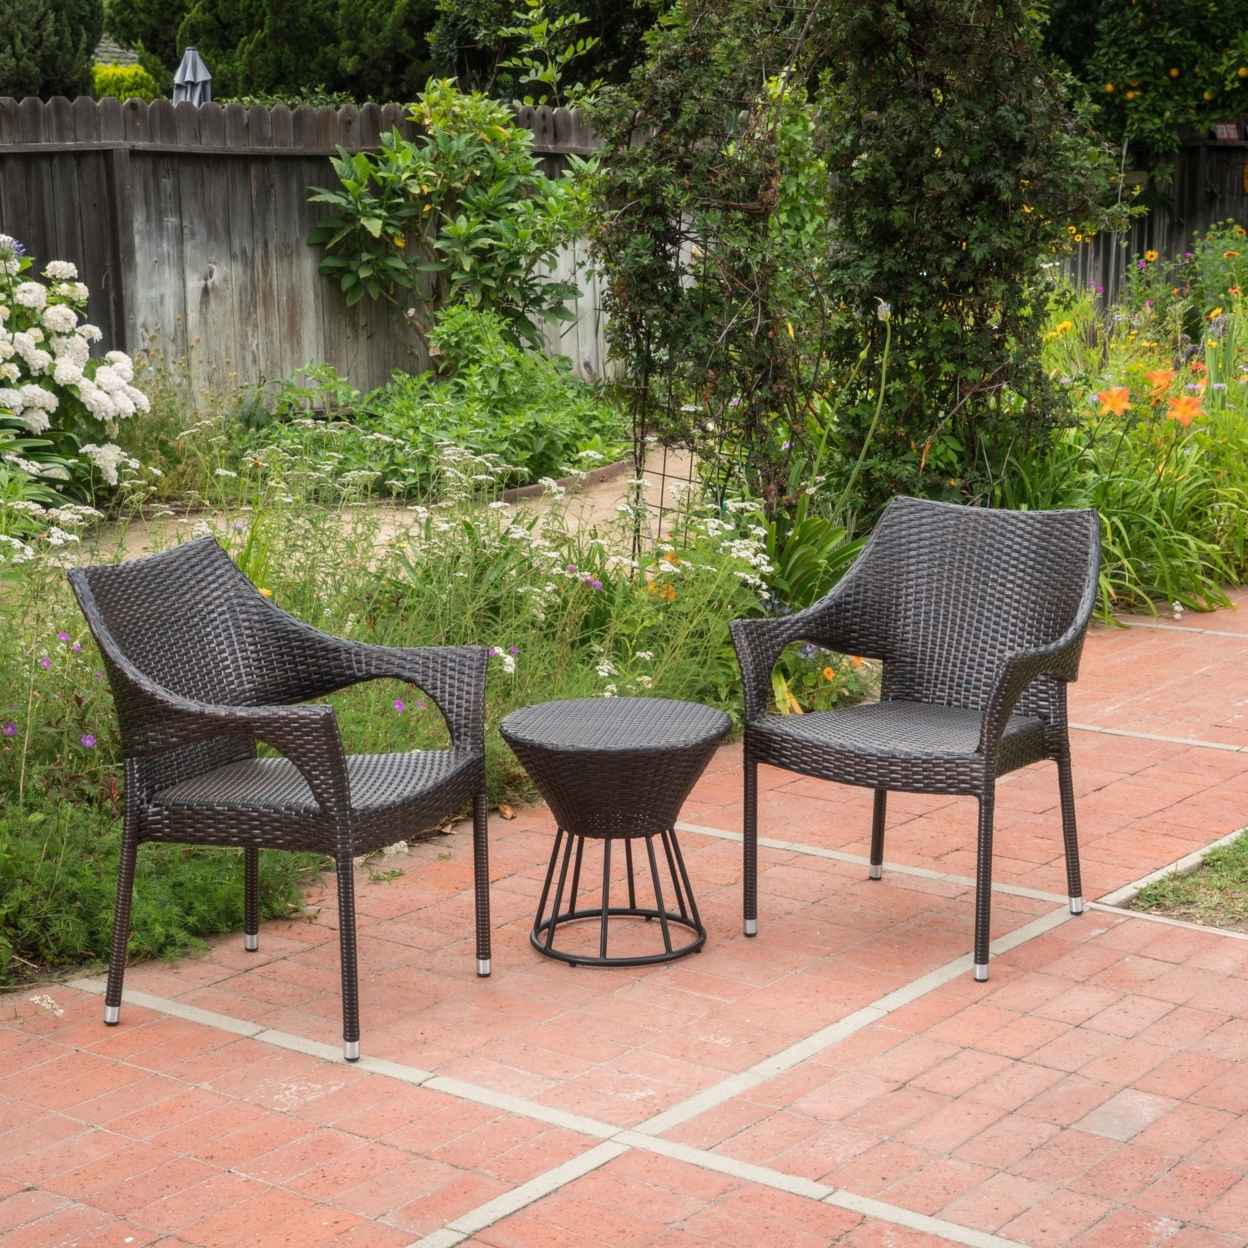 Alfheimr Outdoor 3 Piece Multi-brown Wicker Stacking Chair Chat Set - Trapezoid Table